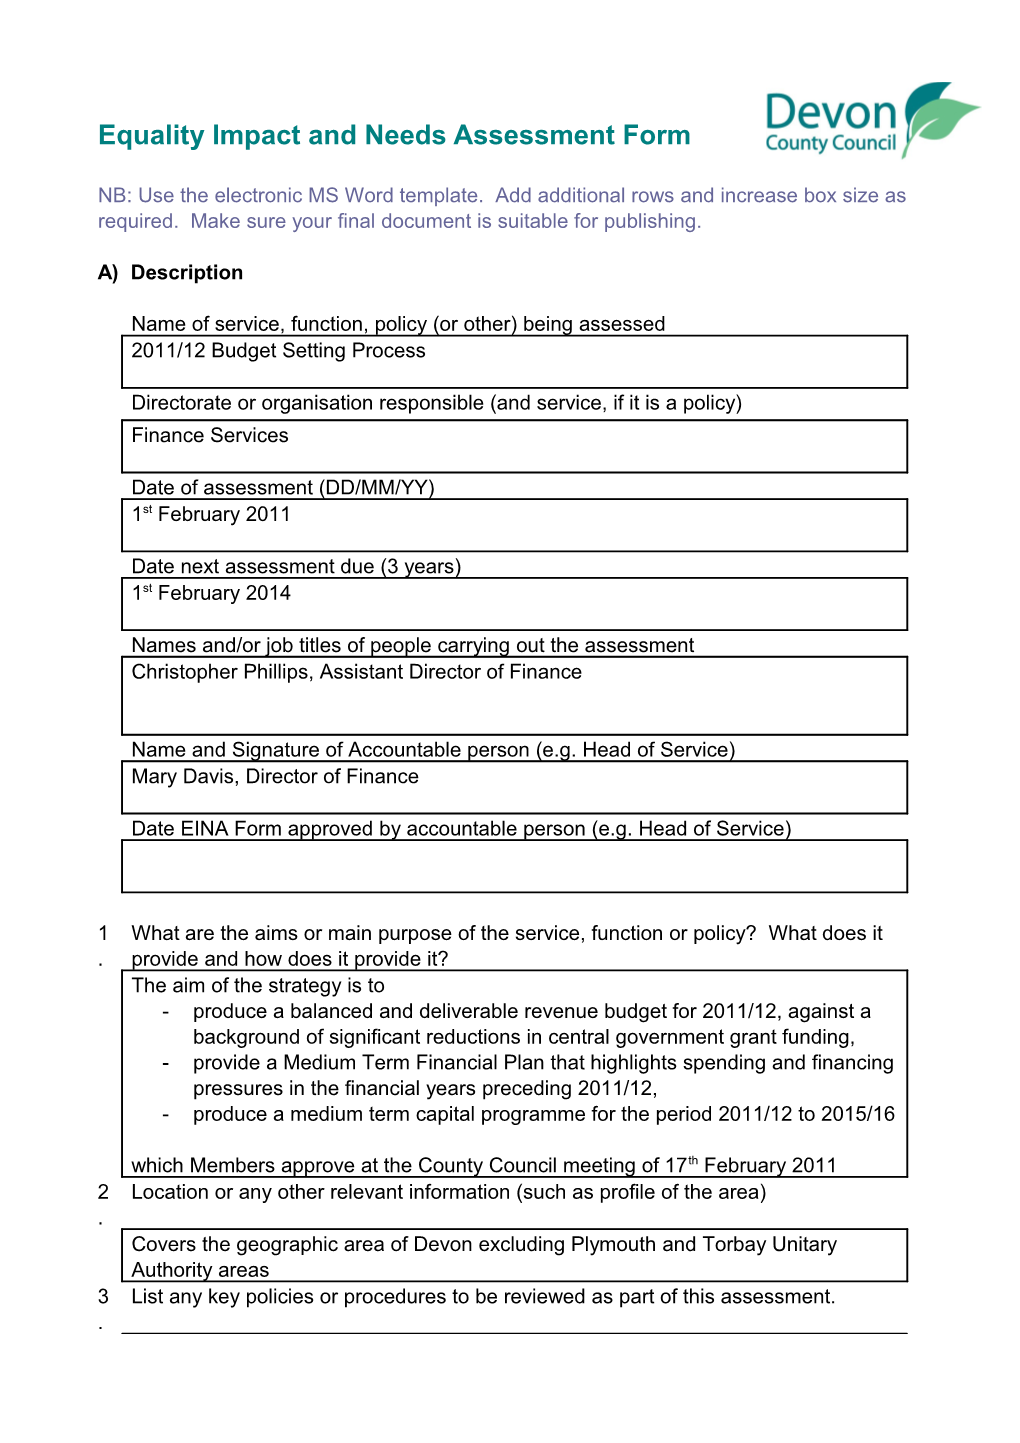 Equality Impact and Needs Assessment Form